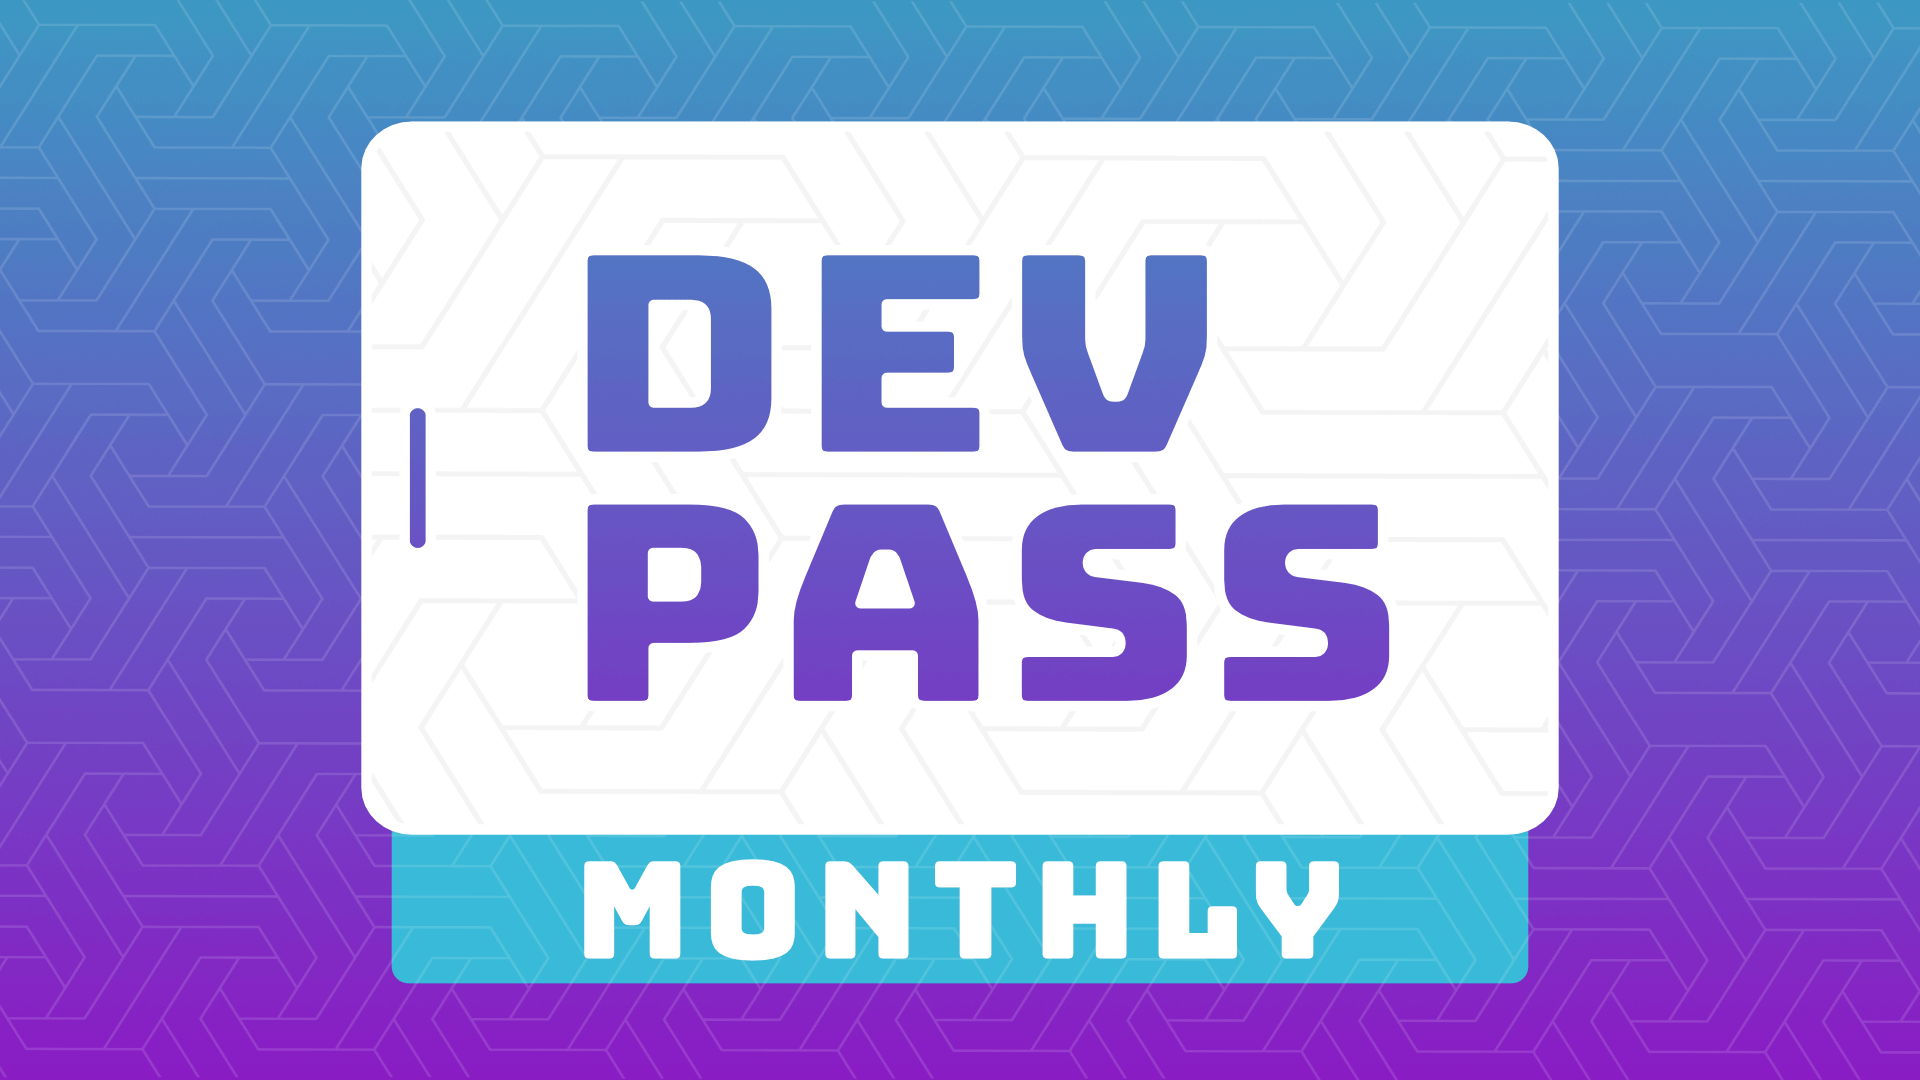 DevPass Monthly Subscription Overview Card